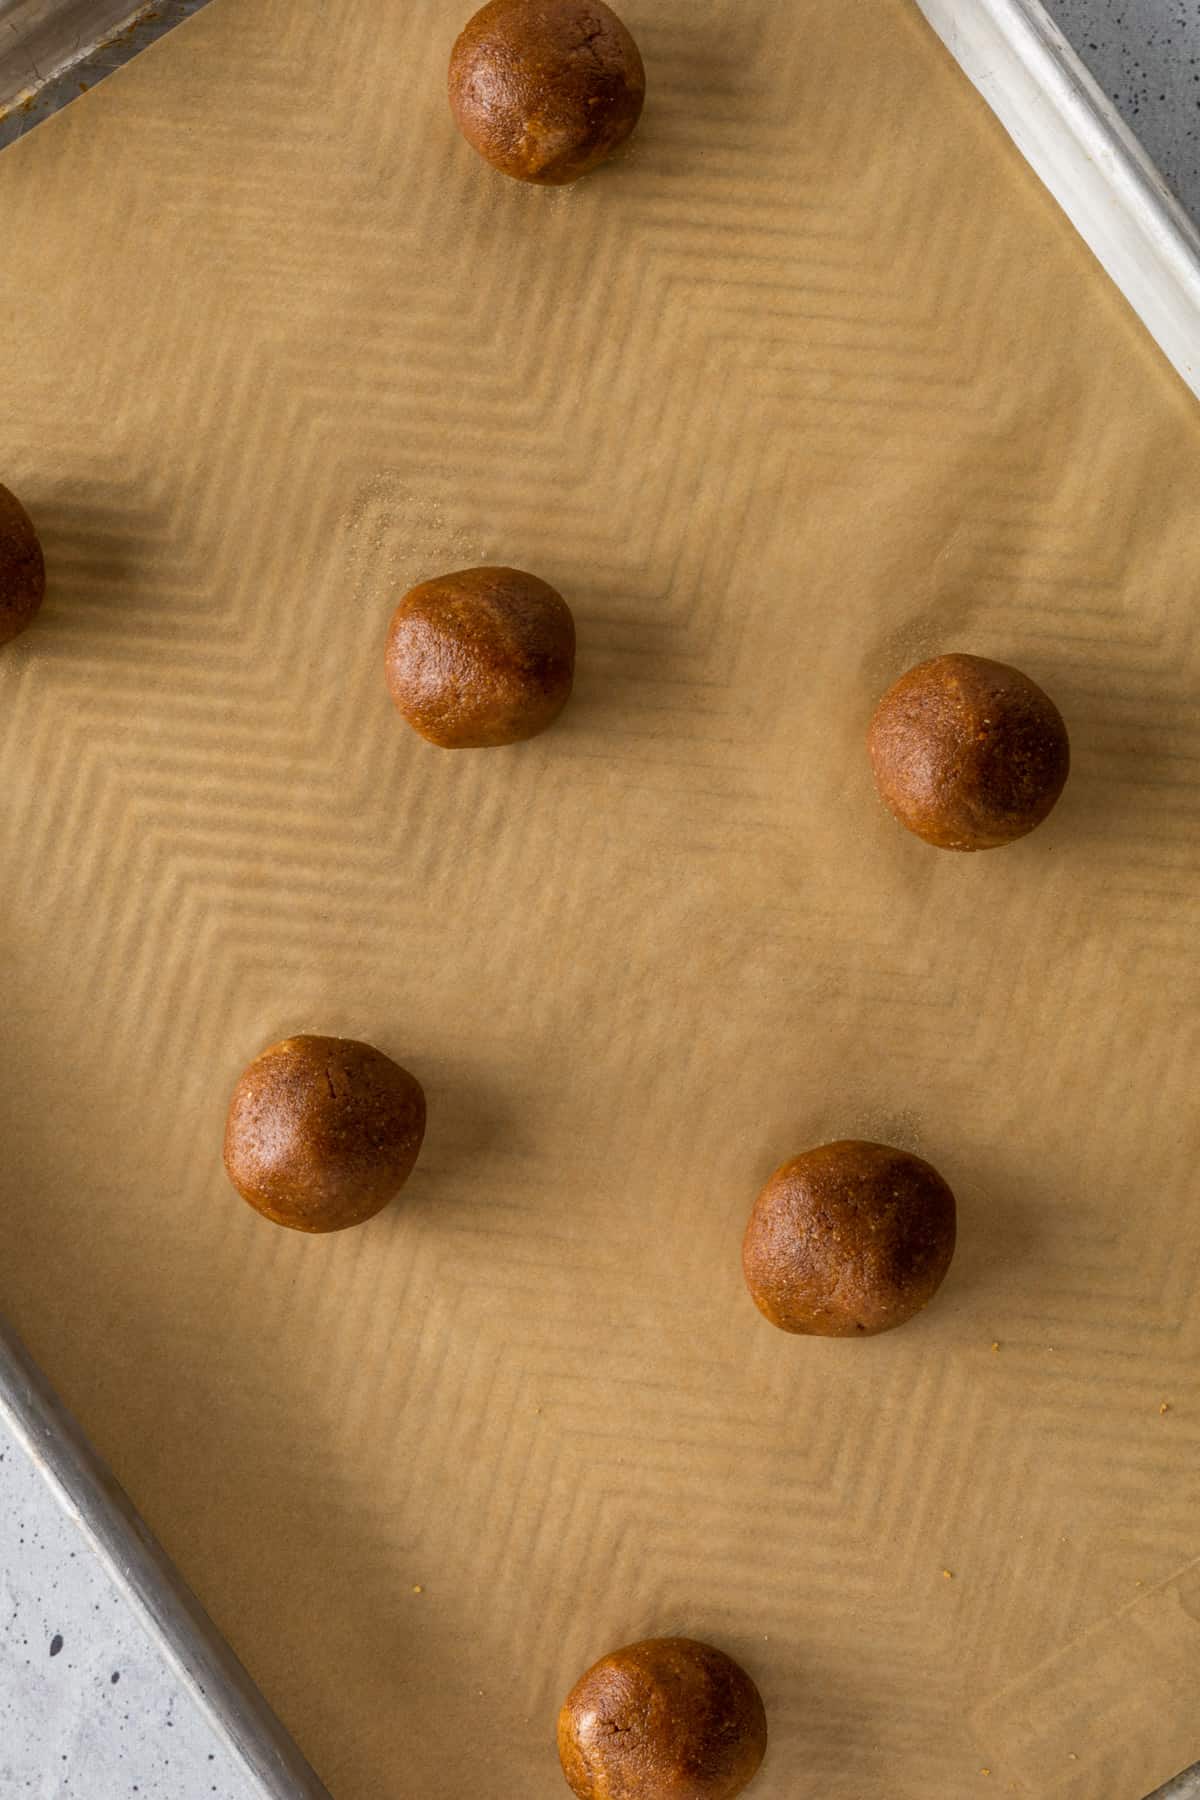 Rounded balls of cookie dough on a parchment-lined tray.